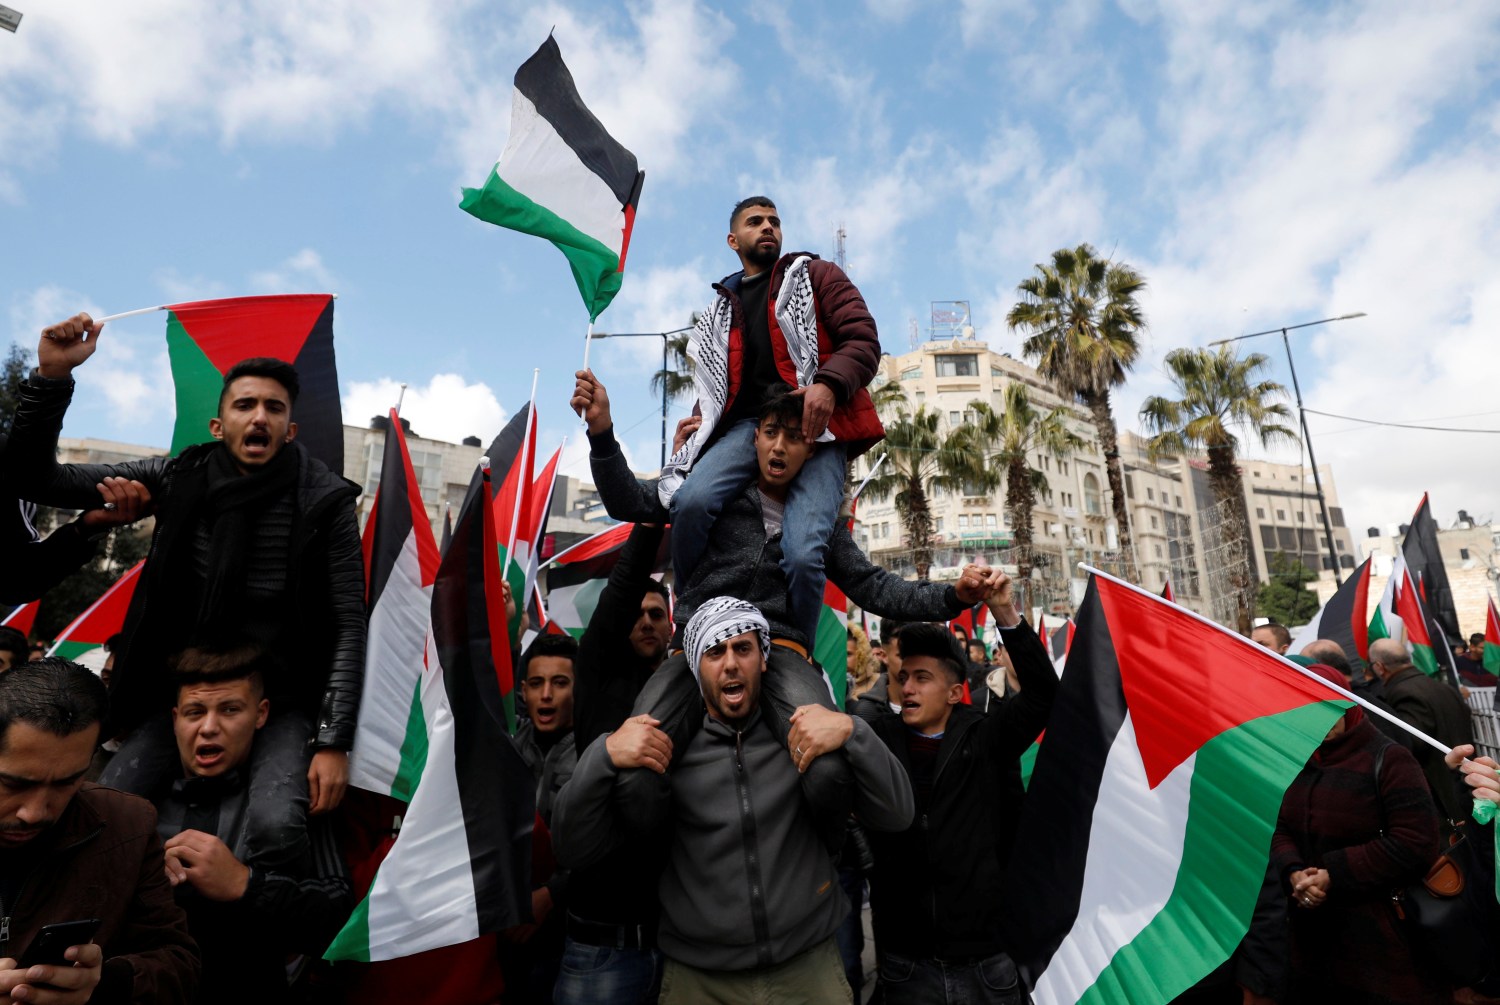 Palestinian demonstrators take part in a rally in support of President Mahmoud Abbas and against the U.S. President Donald Trump's Middle East peace plan, in Ramallah in the Israeli-occupied West Bank February 11, 2020. REUTERS/Mohamad Torokman